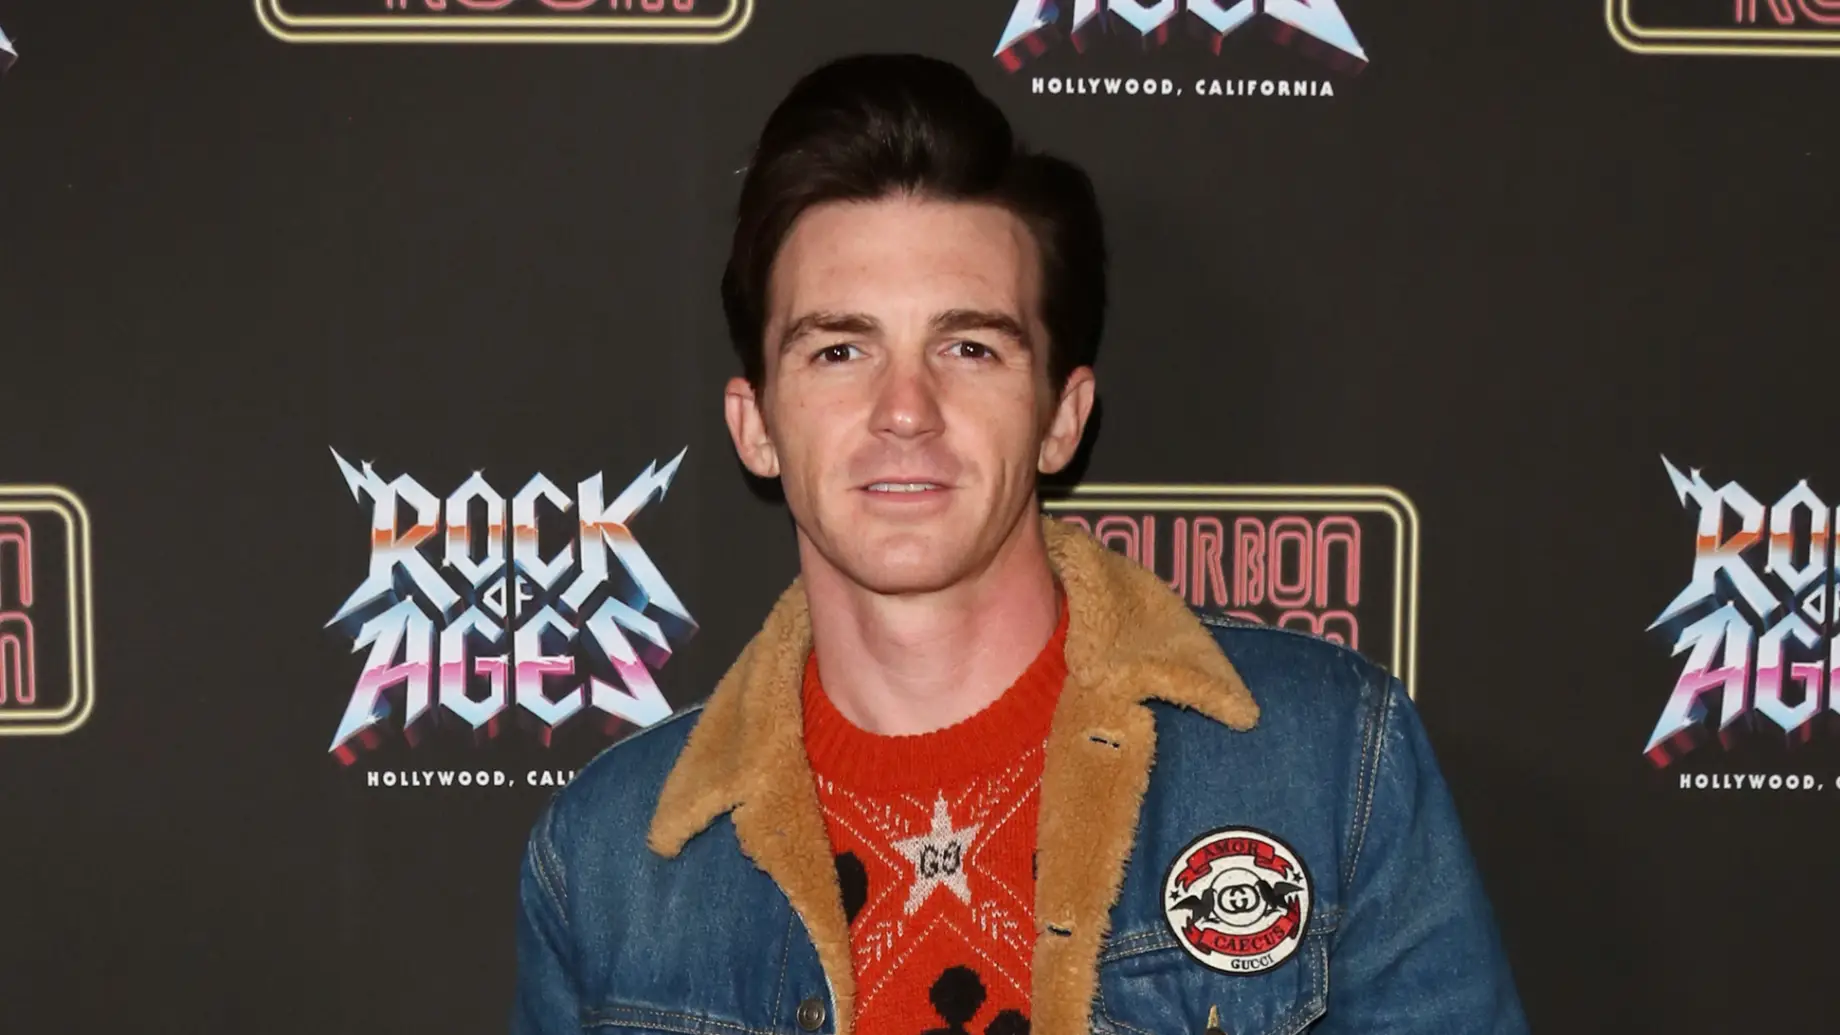 Drake Bell Says He Was ‘Incredibly Irresponsible’ When Recalling Past With Underaged Girl